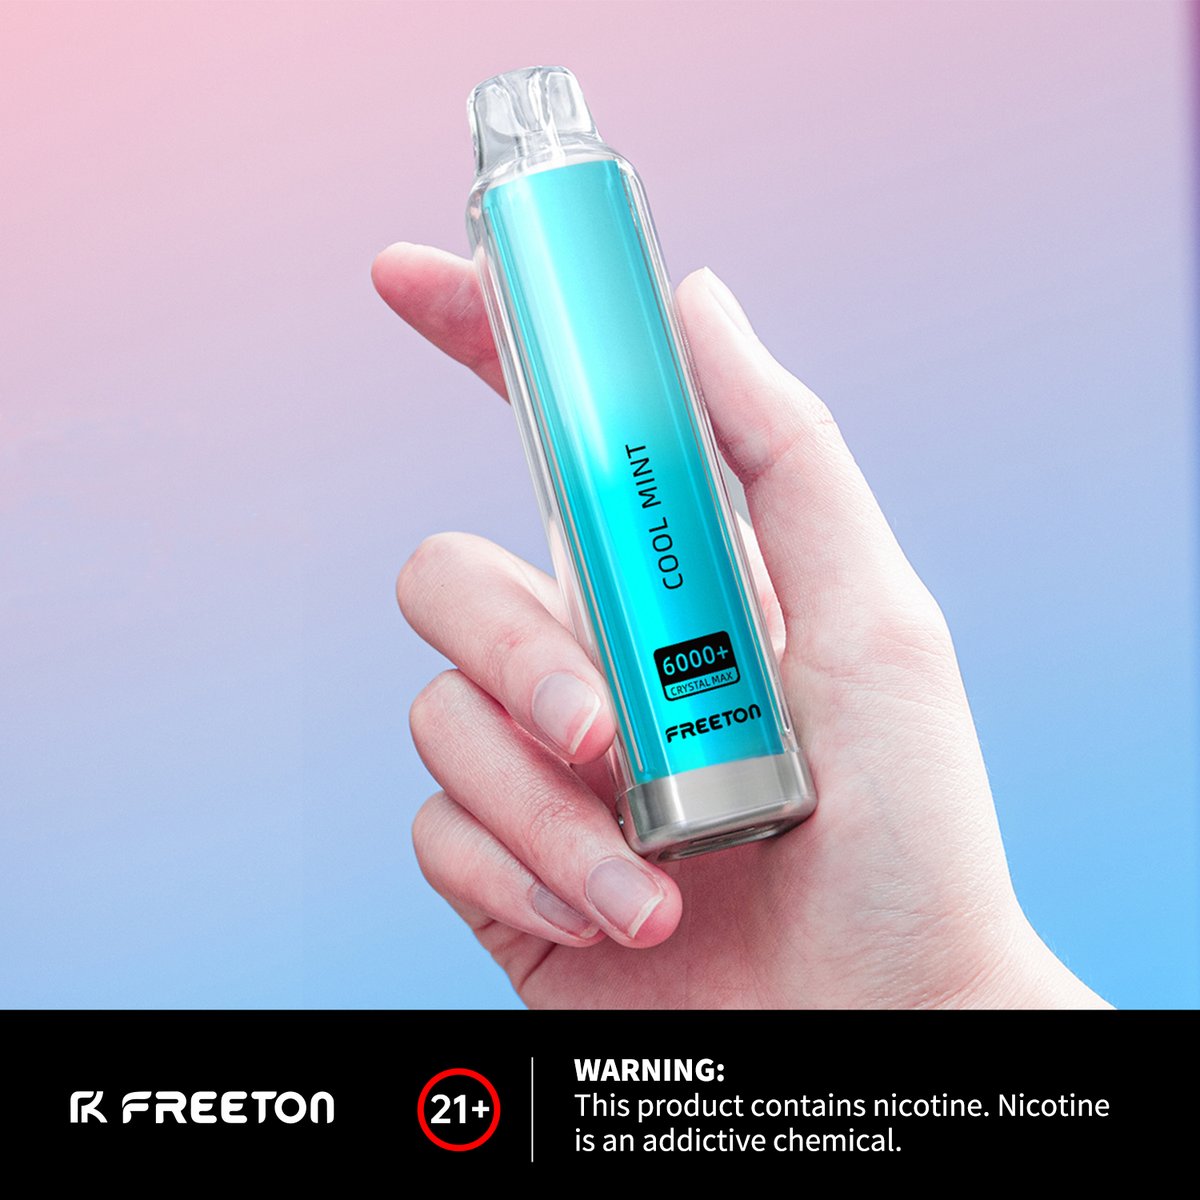 𝓒𝓻𝔂𝓼𝓽𝓪𝓵 𝓜𝓪𝔁 #coolmint by @Freetonofficial  handcheck👀 The flavor is awesome, too💗

freetontech.com
Warning: This product contains nicotine. Nicotine is an addictive chemical.
#freeton #vape #newvape #vapelife #vaping #lovevape #vapers #vapefam #vapelifestyle